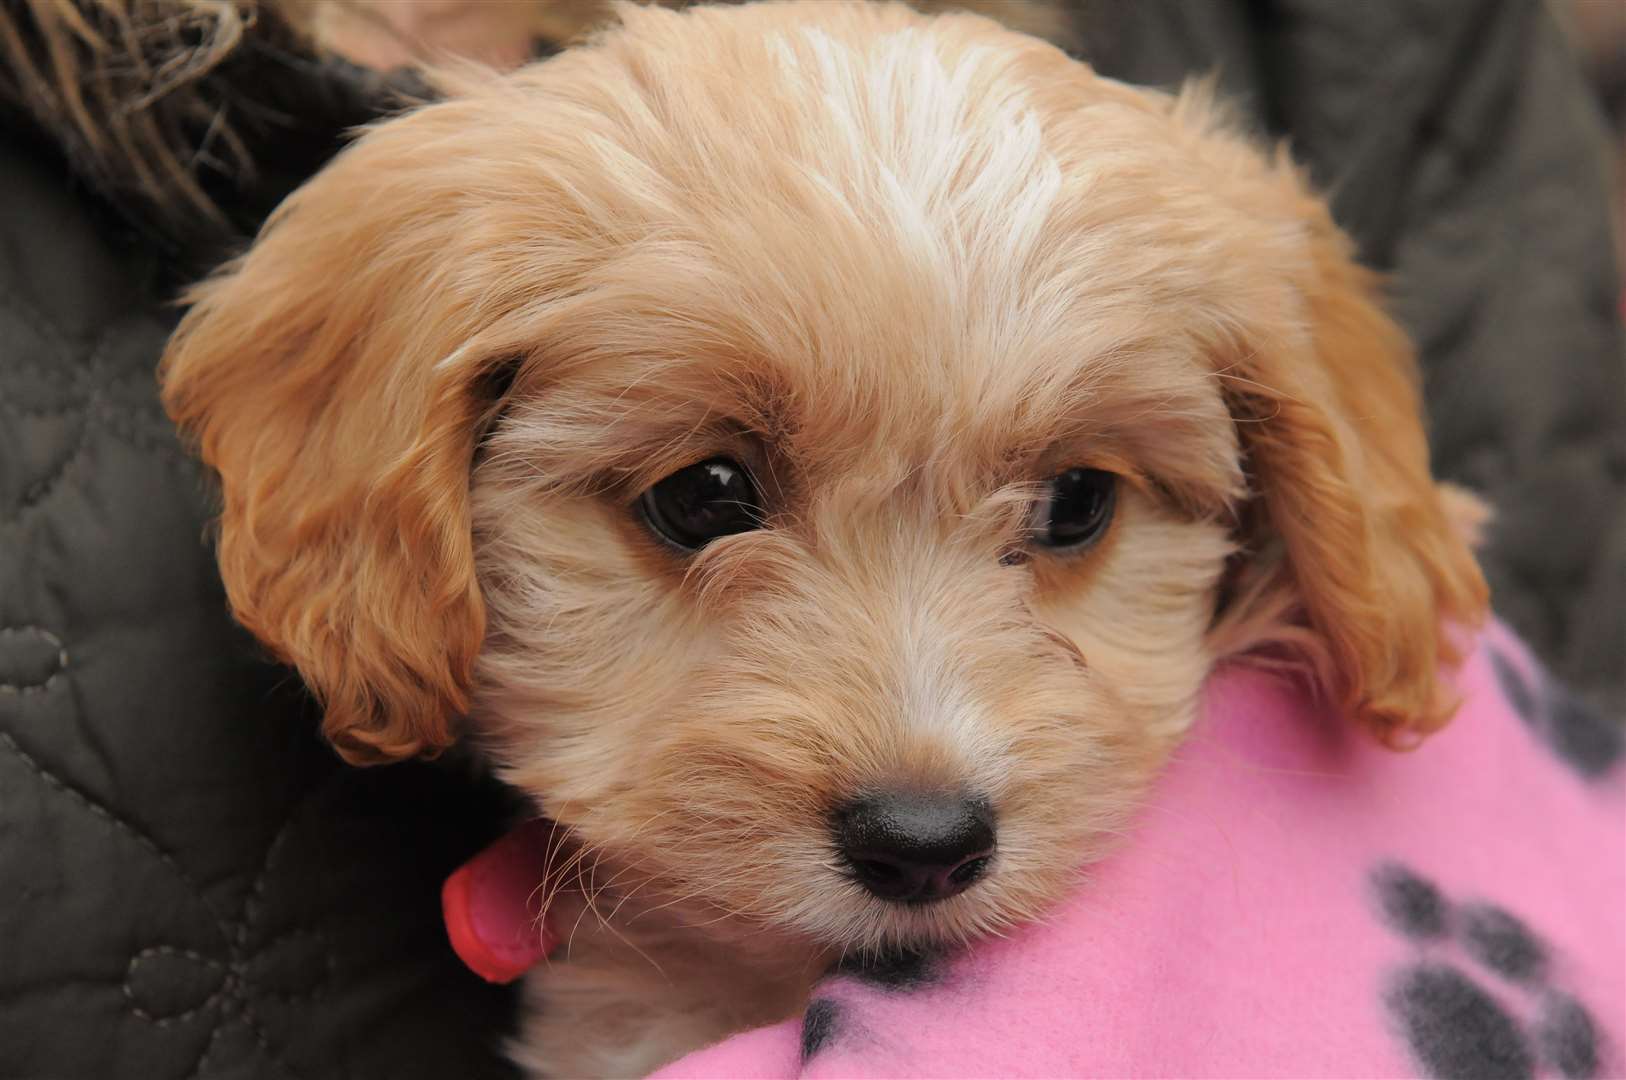 The cavapoo was one of four poodle cross breeds in the list. Image: iStock.